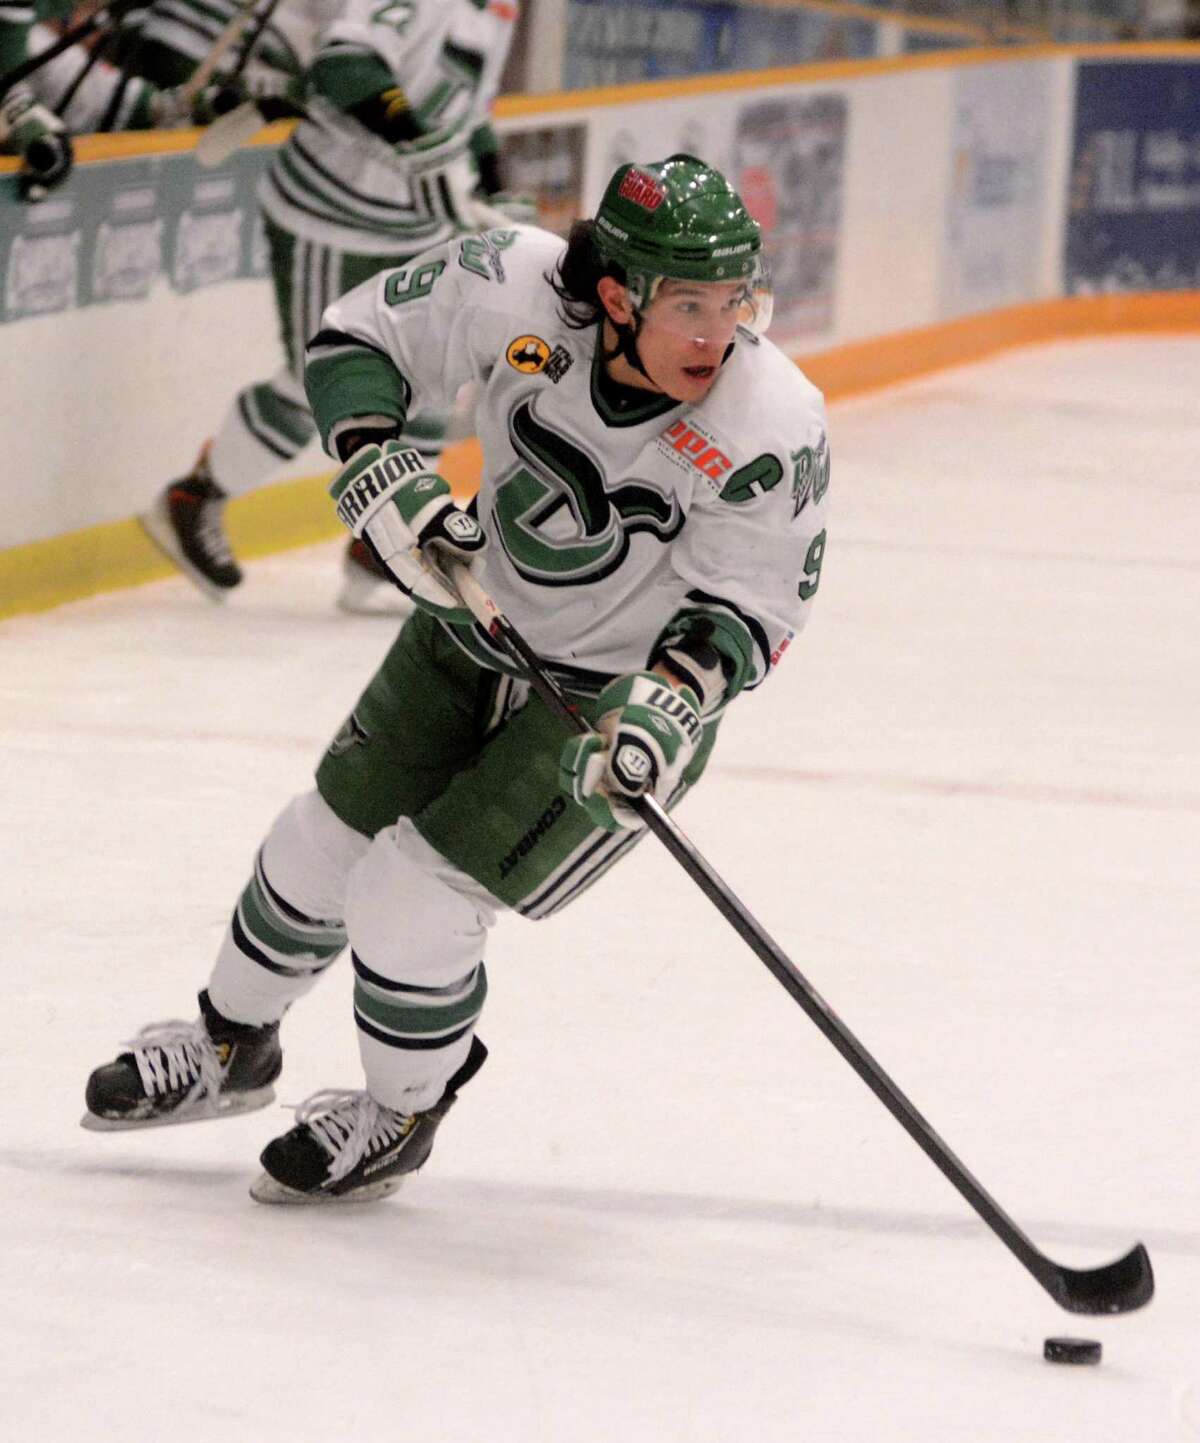 Former Danbury Whalers captain David Lun has been hired as the first head coach for the Federal Hockey League's Brewster Bulldogs expansion team.